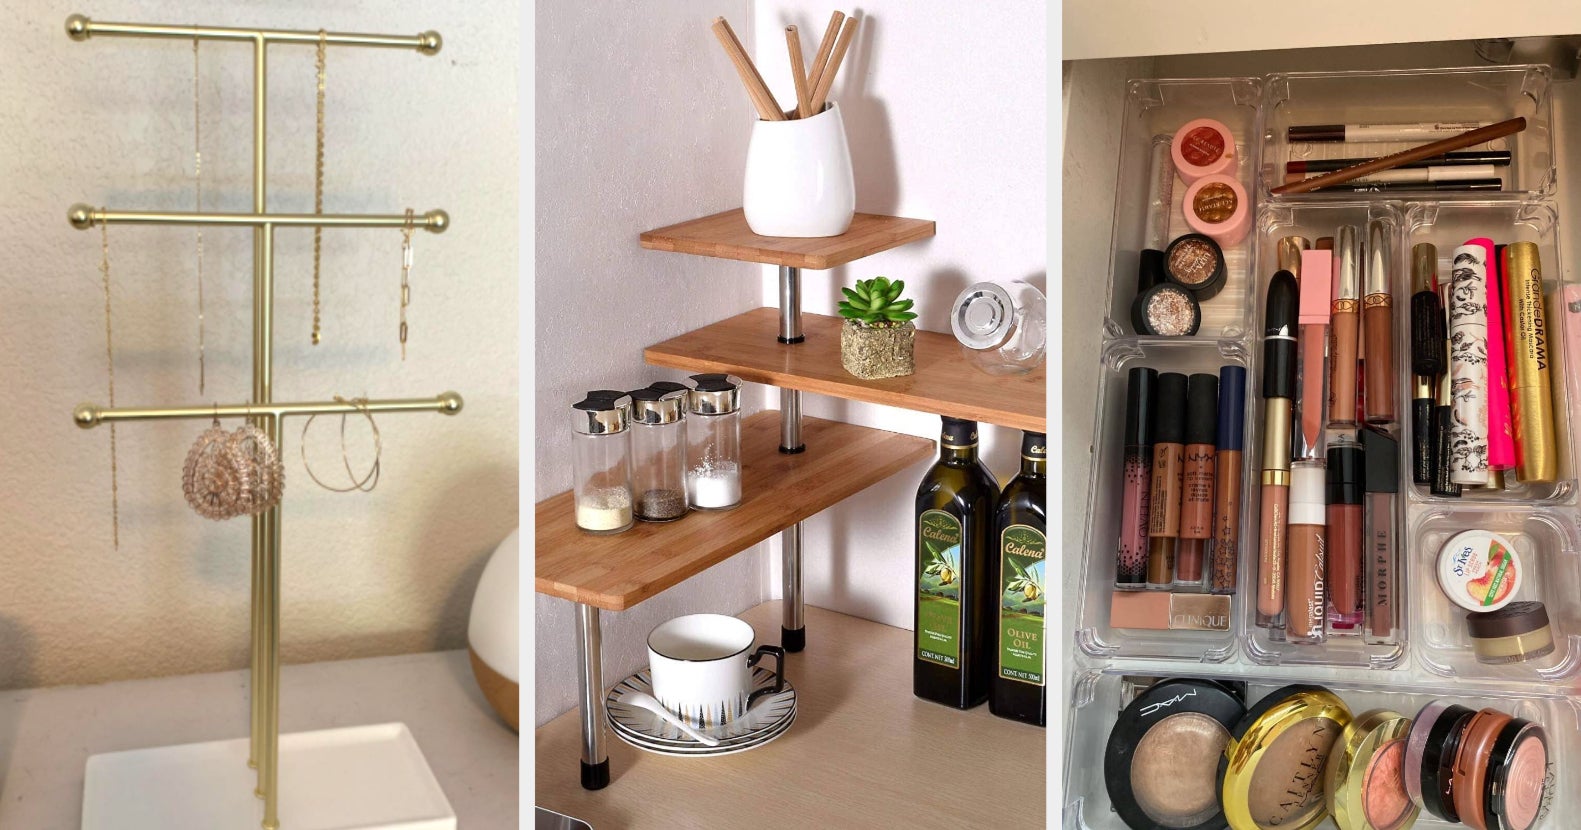 Hanging cabinet with damping lift pull-out kitchen cabinet pull-down shelf  spices aluminum pull-down basket - AliExpress